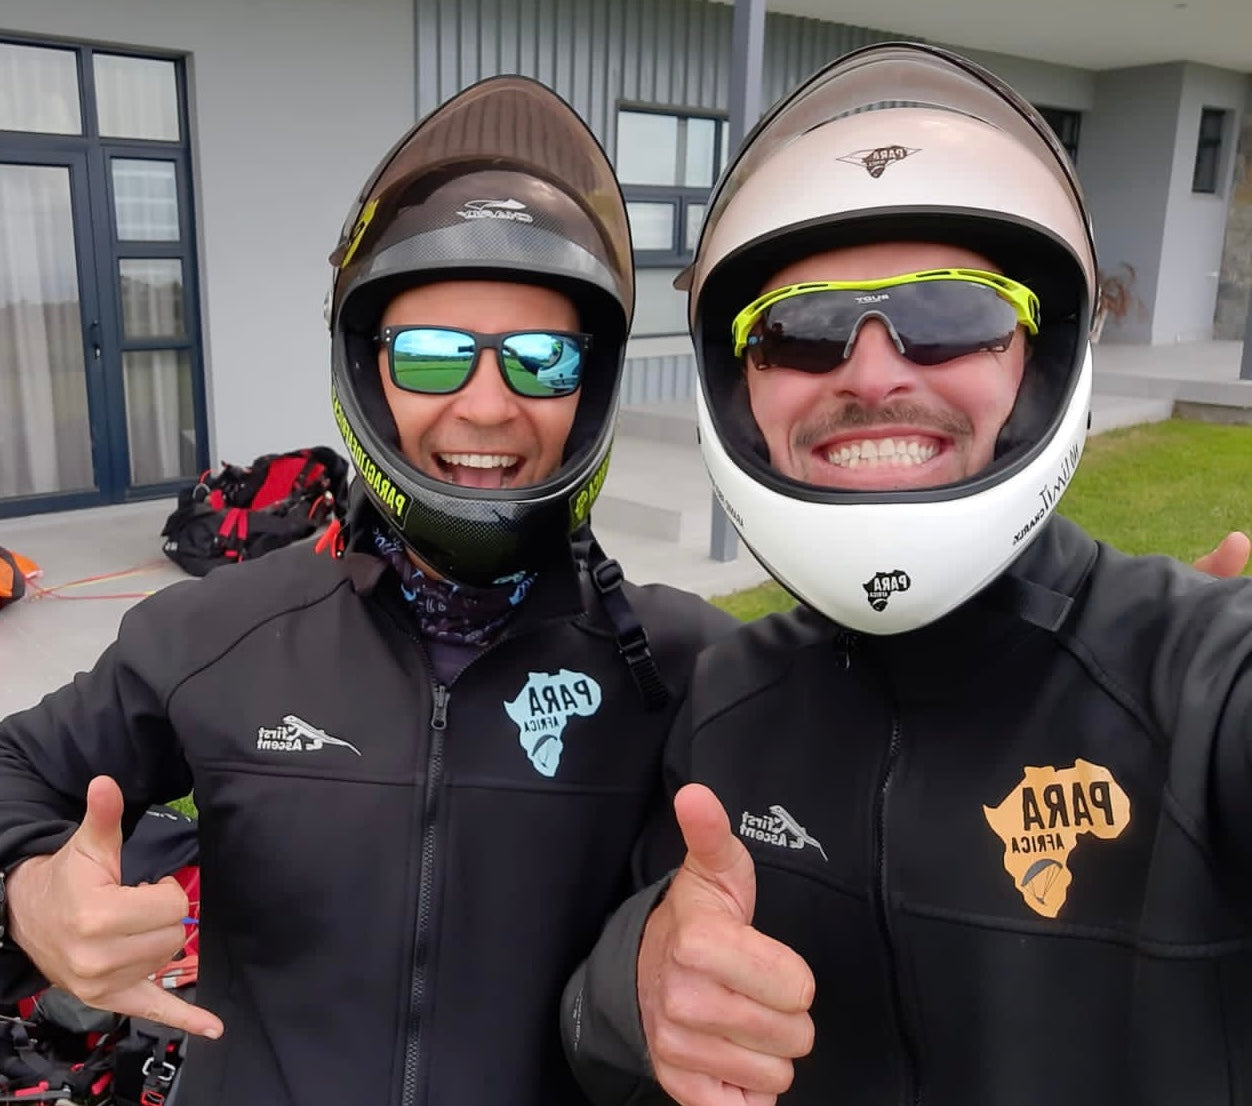 The owners of Paraglide Africa - Theunis de Bruin and Rouberre Botha